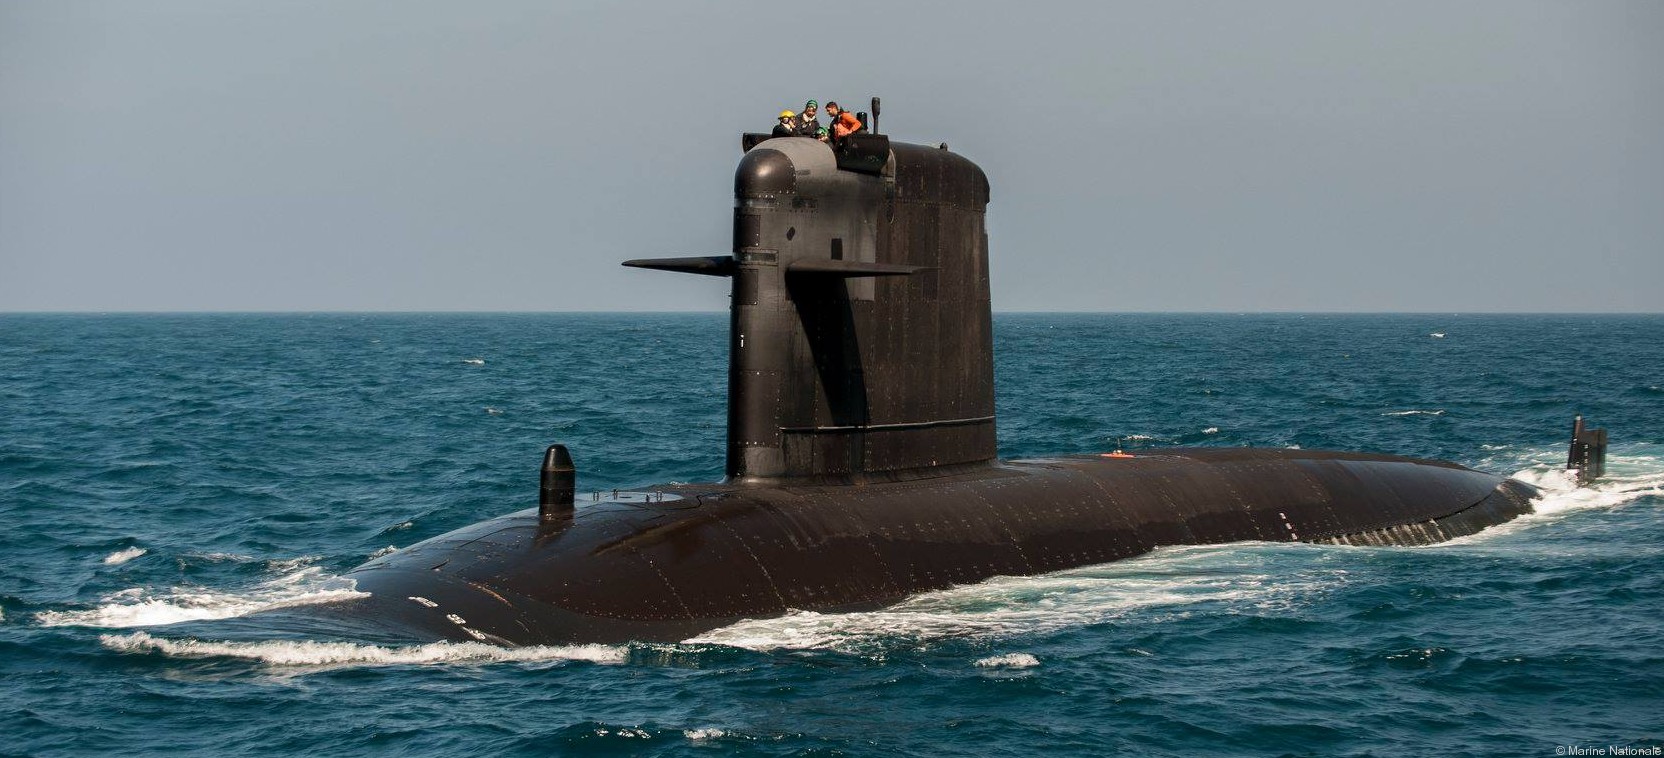 rubis class attack submarine french navy ssn sna marine nationale sous-marin nucleaire d'attaque 08x